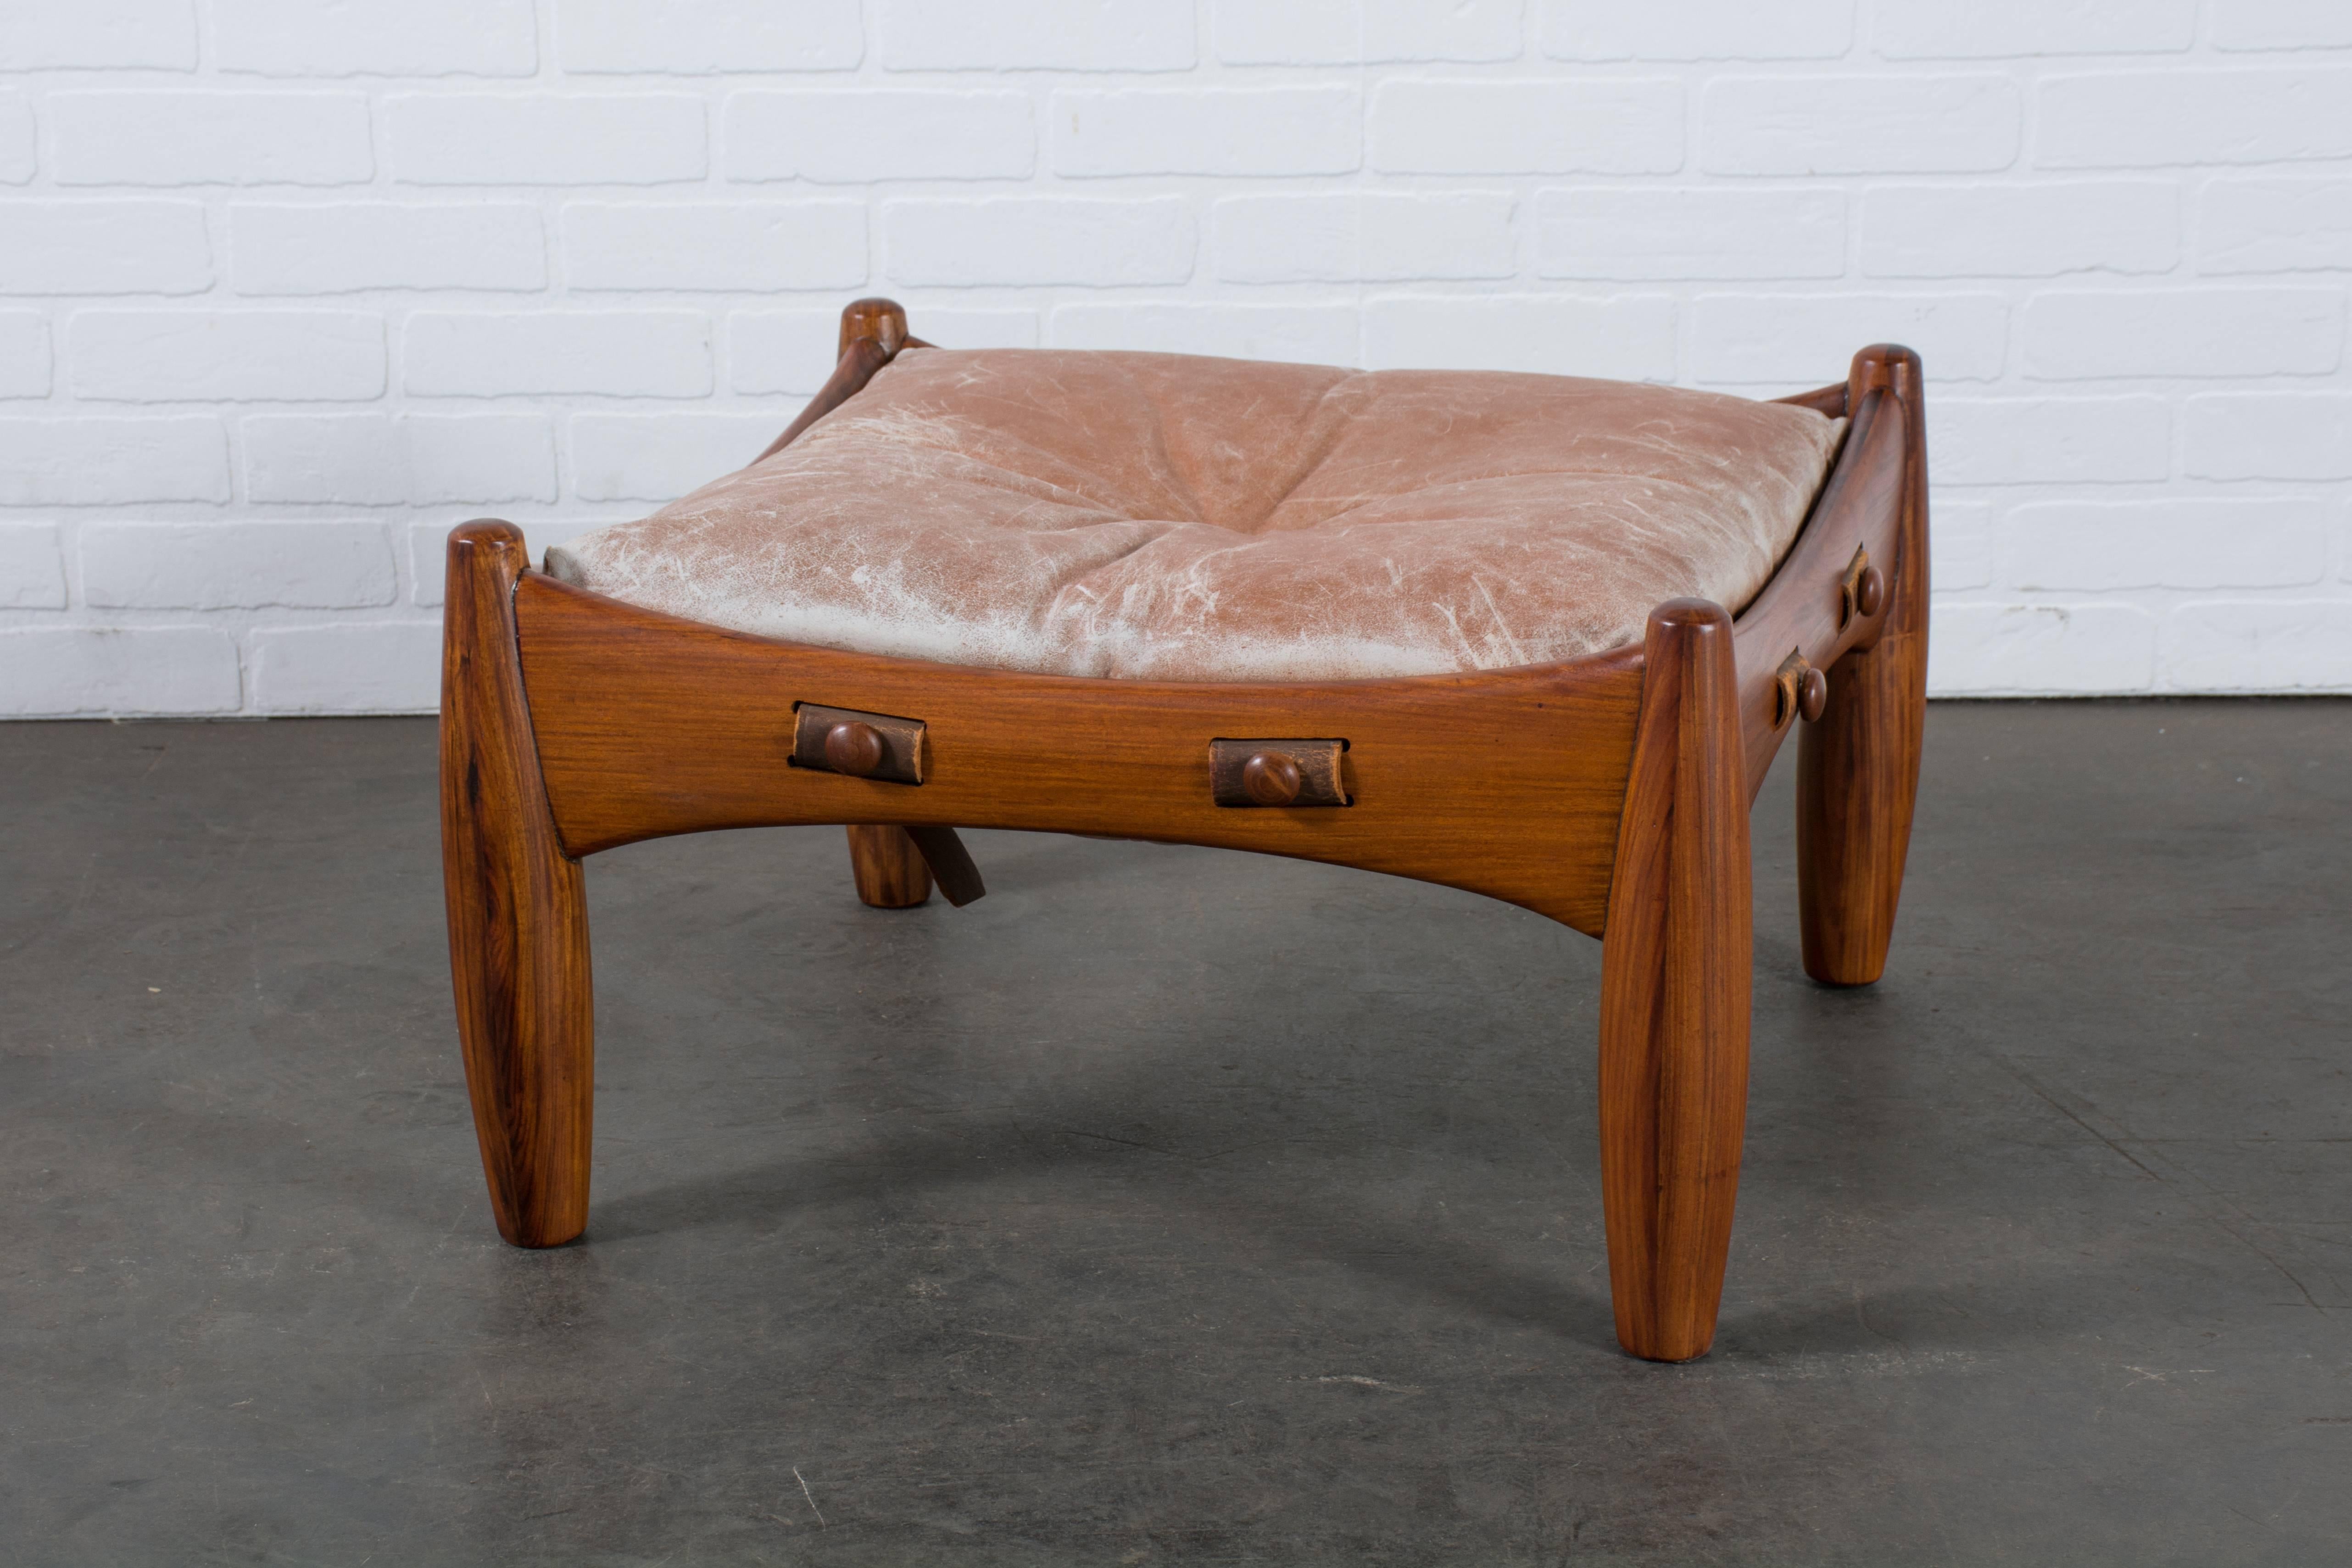 This Mid-Century Modern footstool or ottoman is the 'Sheriff' model designed by Sergio Rodrigues in 1957, Brazil. It was produced by Isa, Italy. The 'Sheriff' chair and ottoman, or 'Poltrona Mole' as it was nicknamed, won 1st prize at the IV